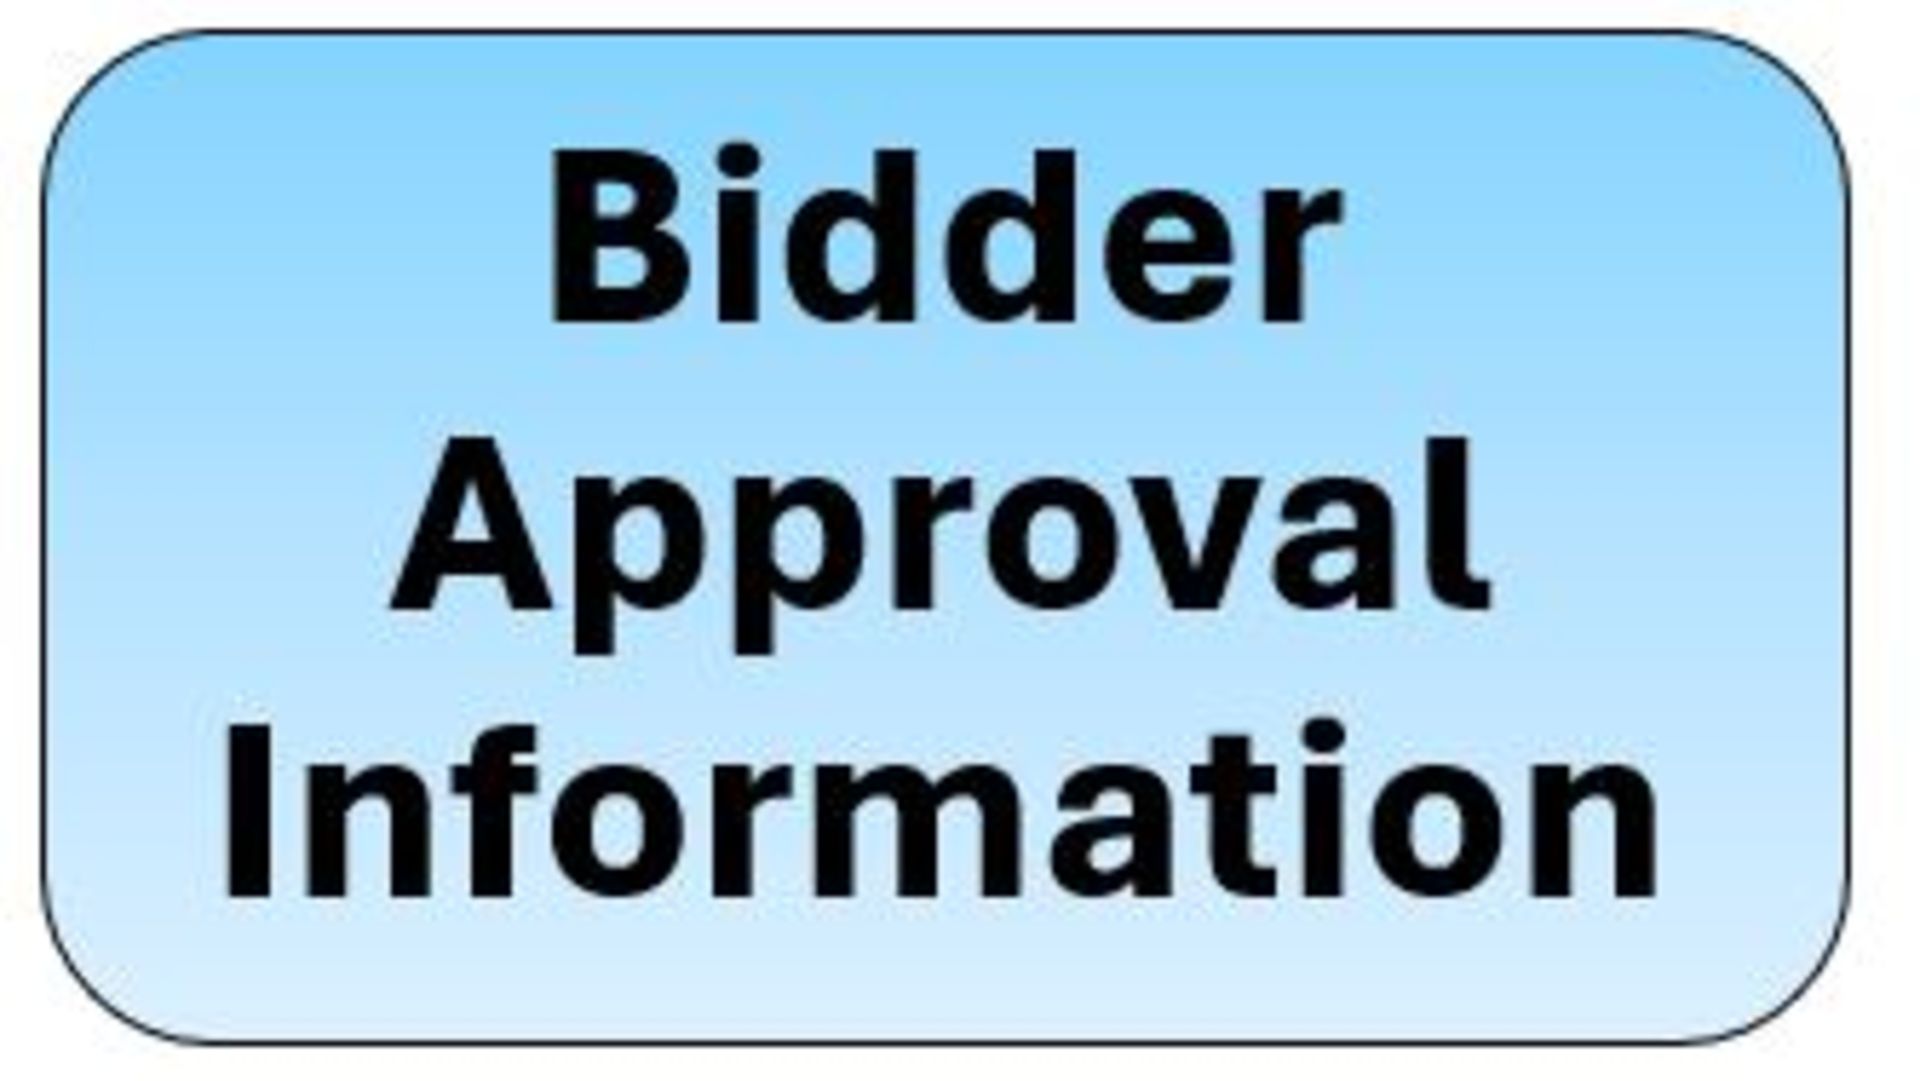 BIDDER APPROVAL - No approvals will be made until 1 week prior to the auction.